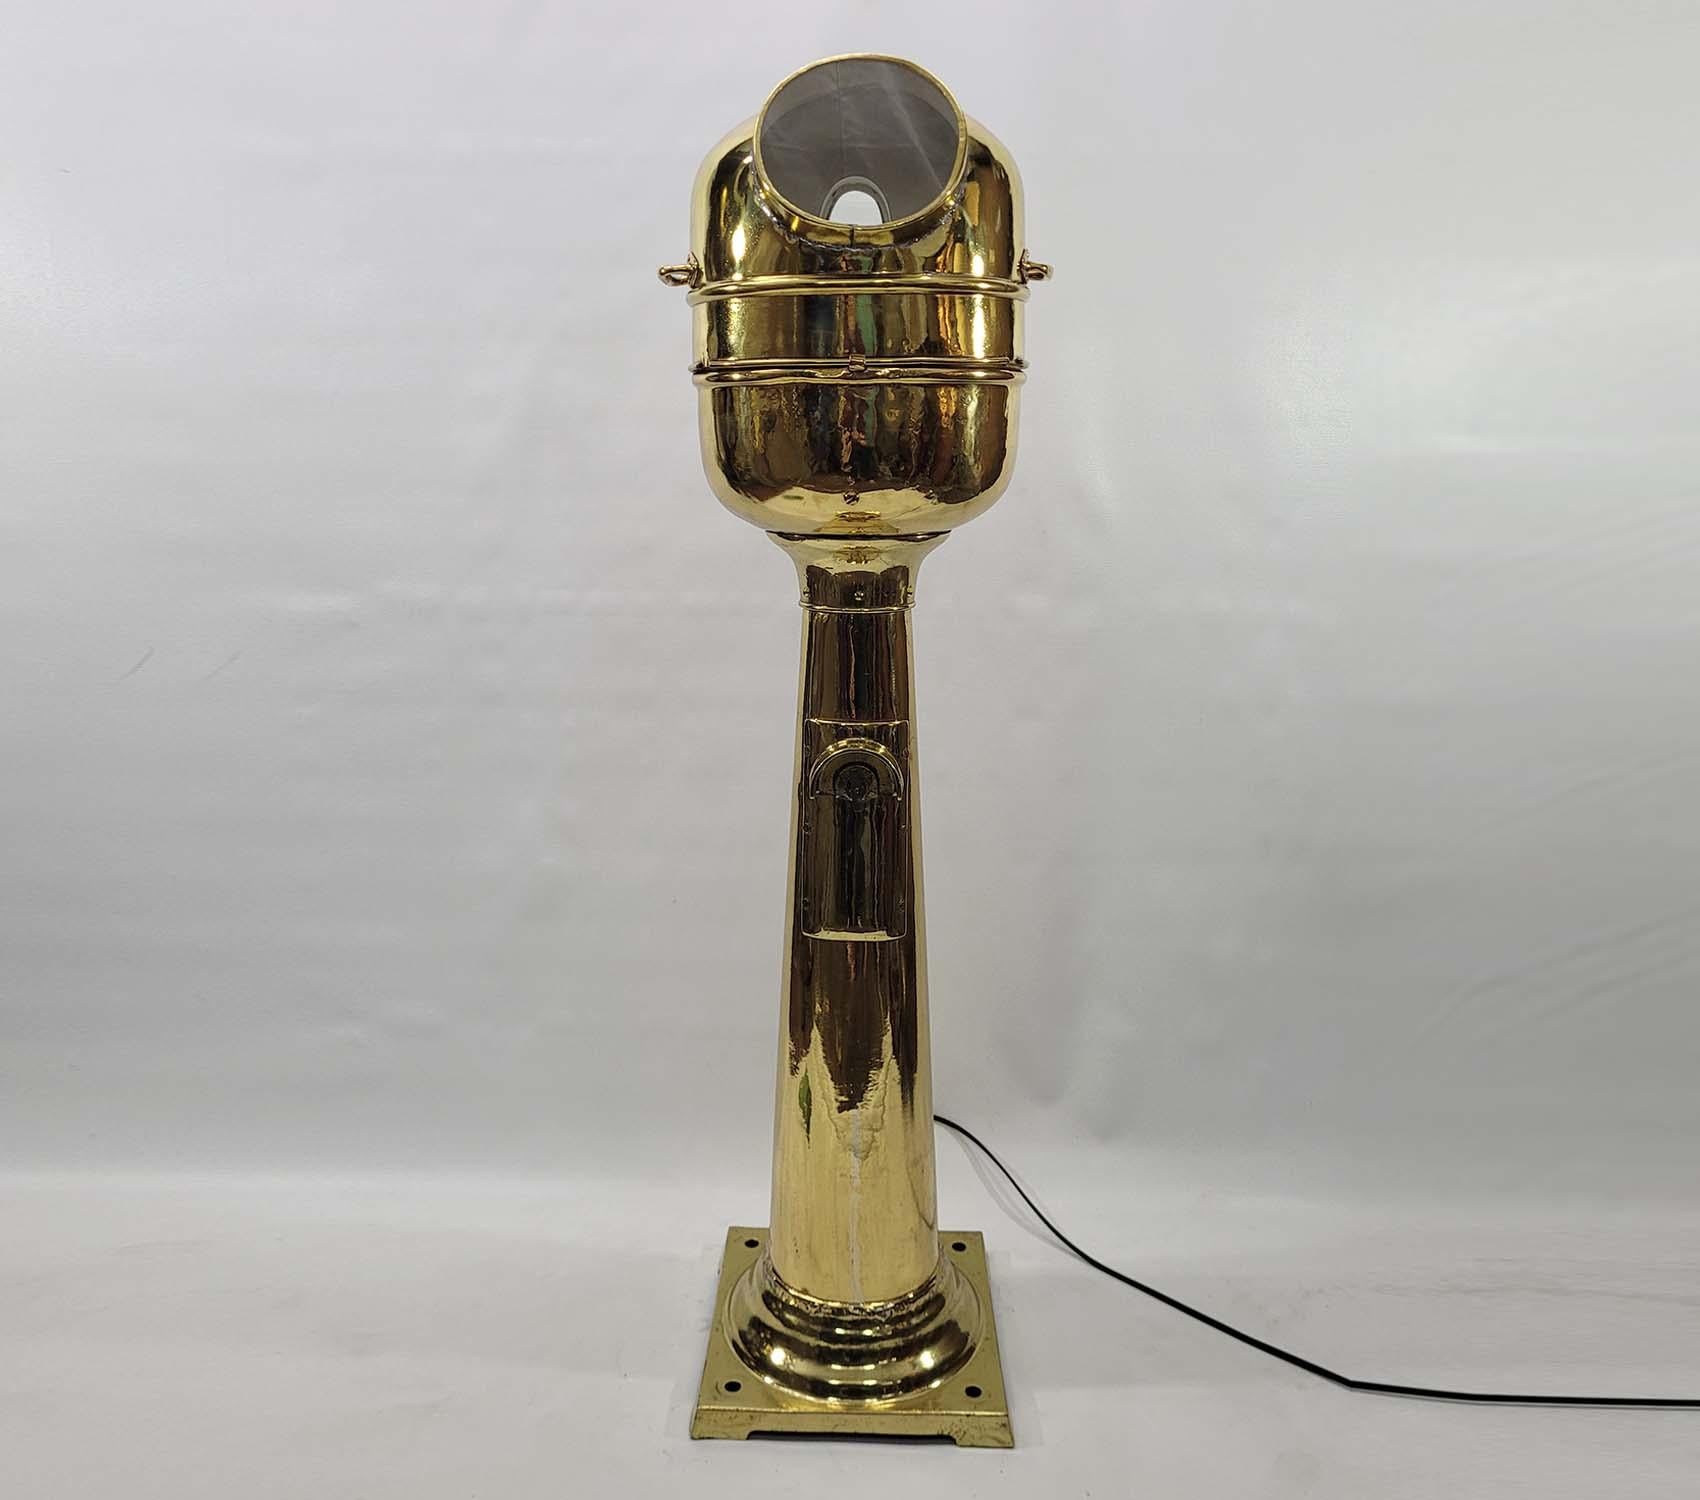 Ships Bridge Binnacle by Kelvin Bottomley Baird Limited of Glasgow and London. The entire Binnacle has been meticulously polished and lacquered. The gimballed compass is engraved 0270. The interior has been fitted with warm lighting. Circa